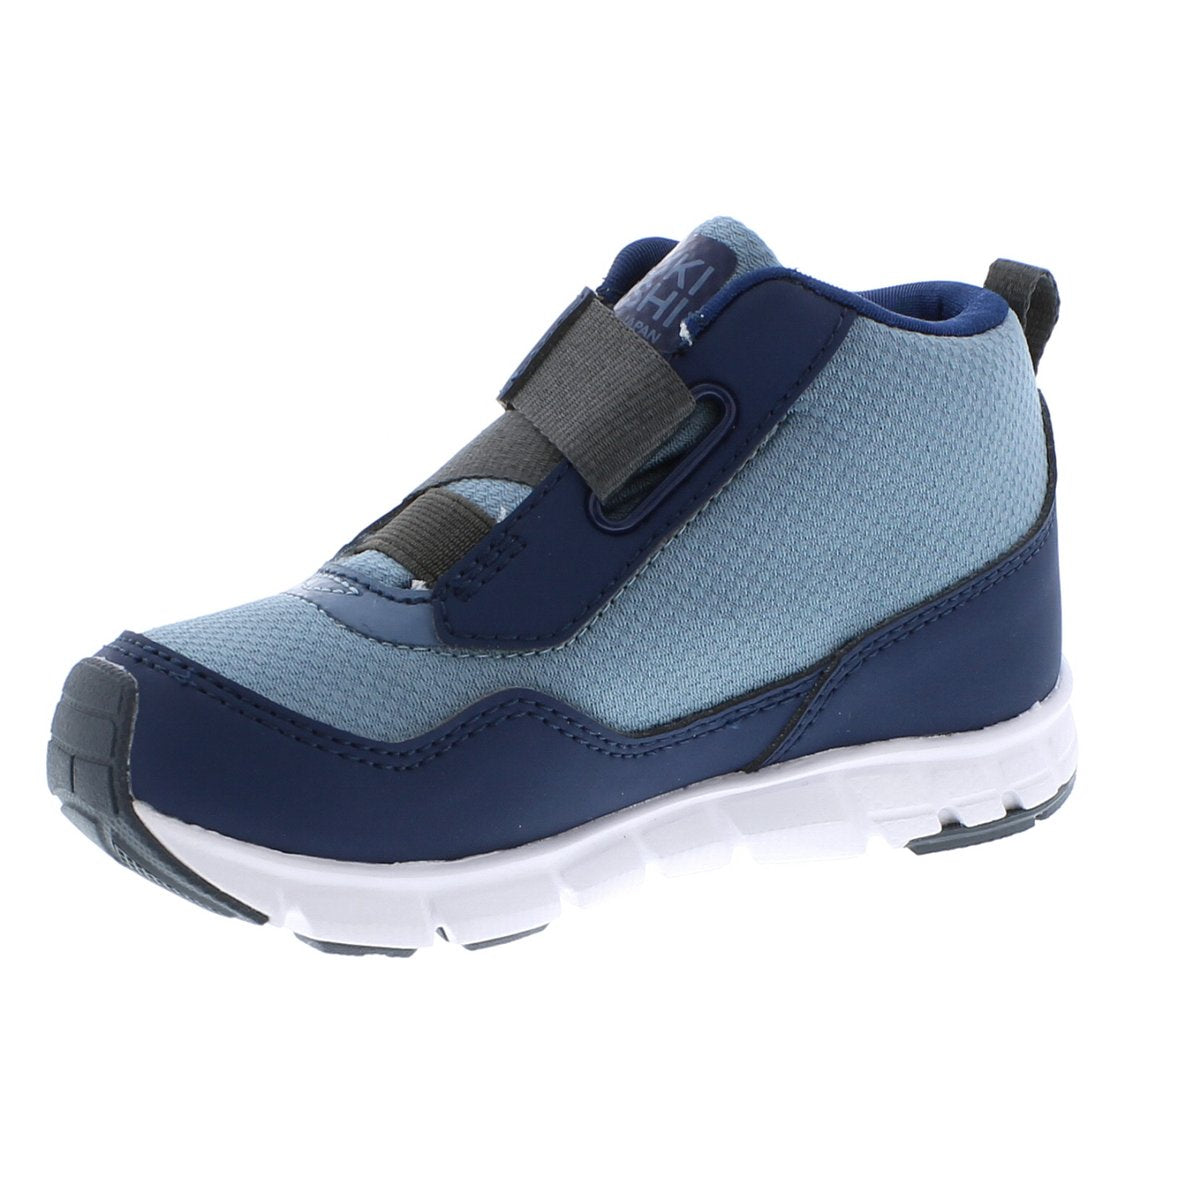 Child Tsukihoshi Tokyo Sneaker in Navy/Sea from the front view